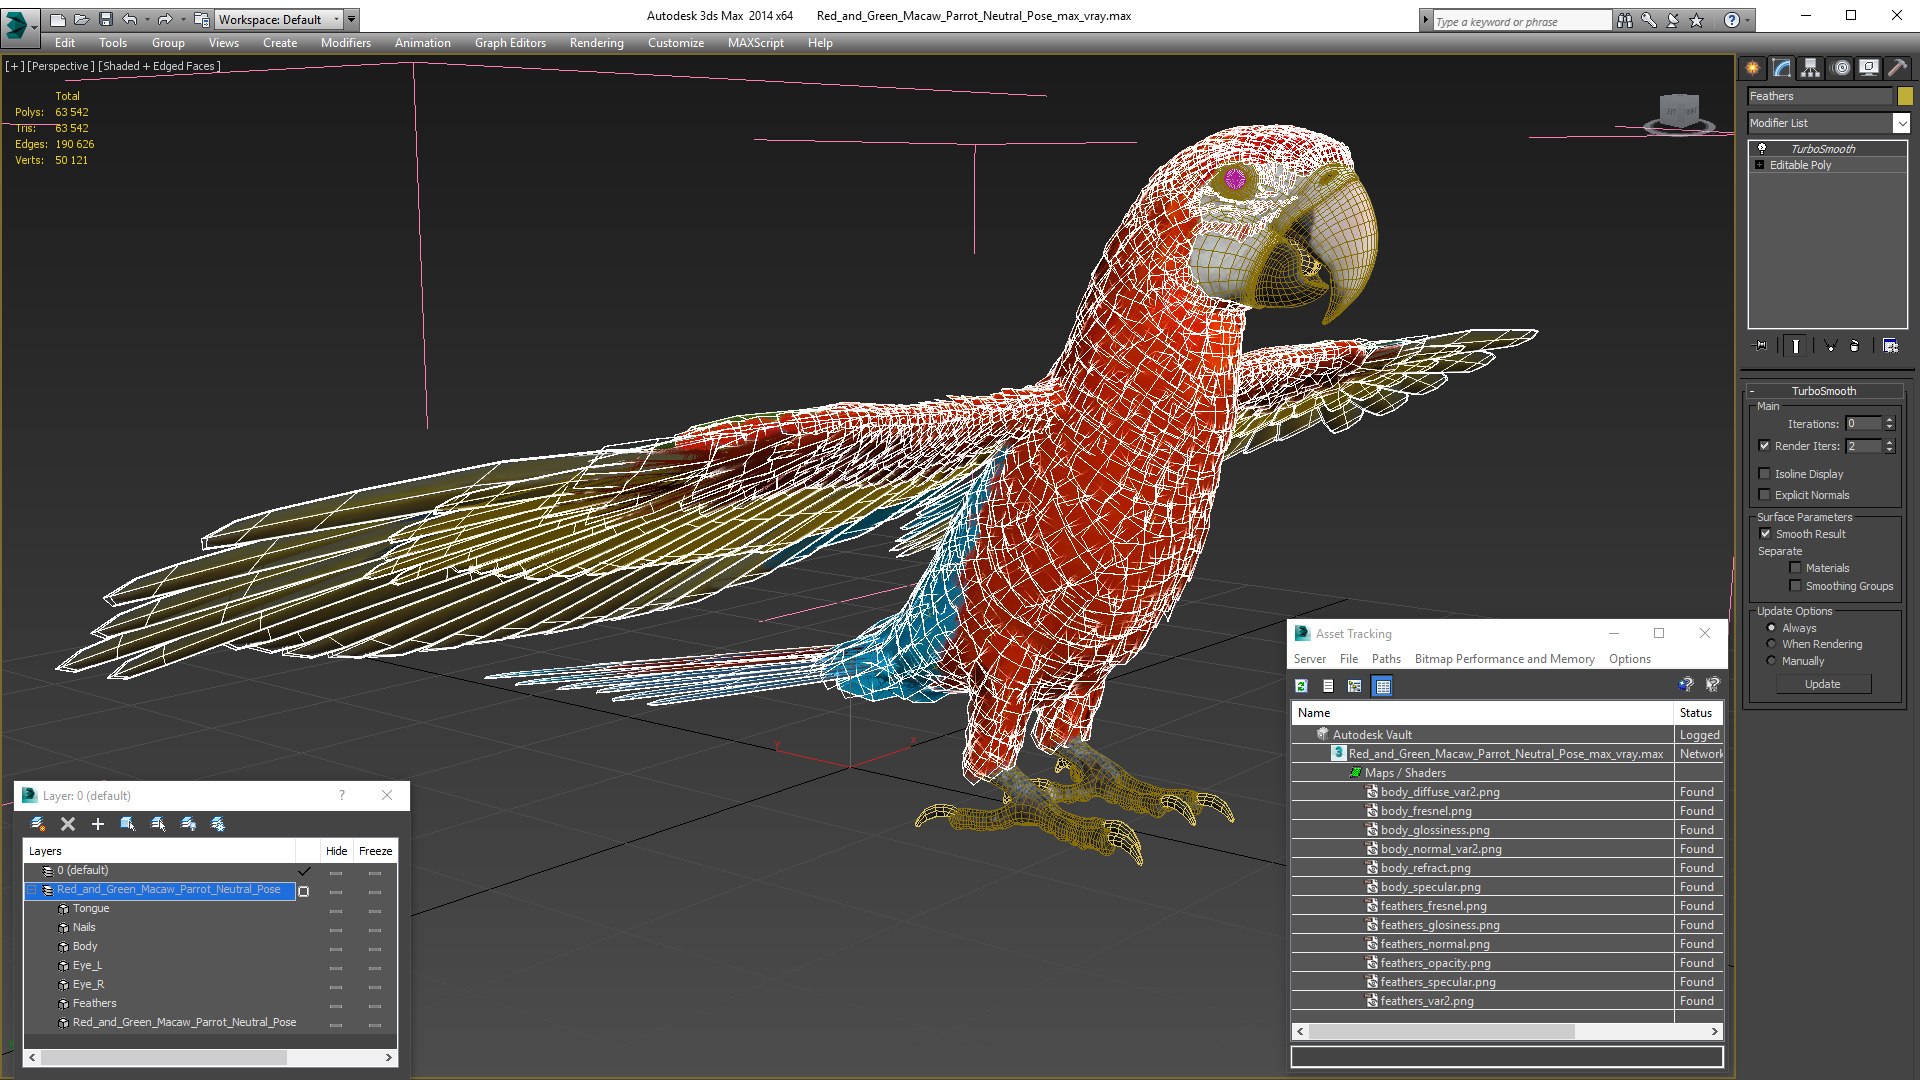 3D Red and Green Macaw Parrot Neutral Pose model - TurboSquid 1772707